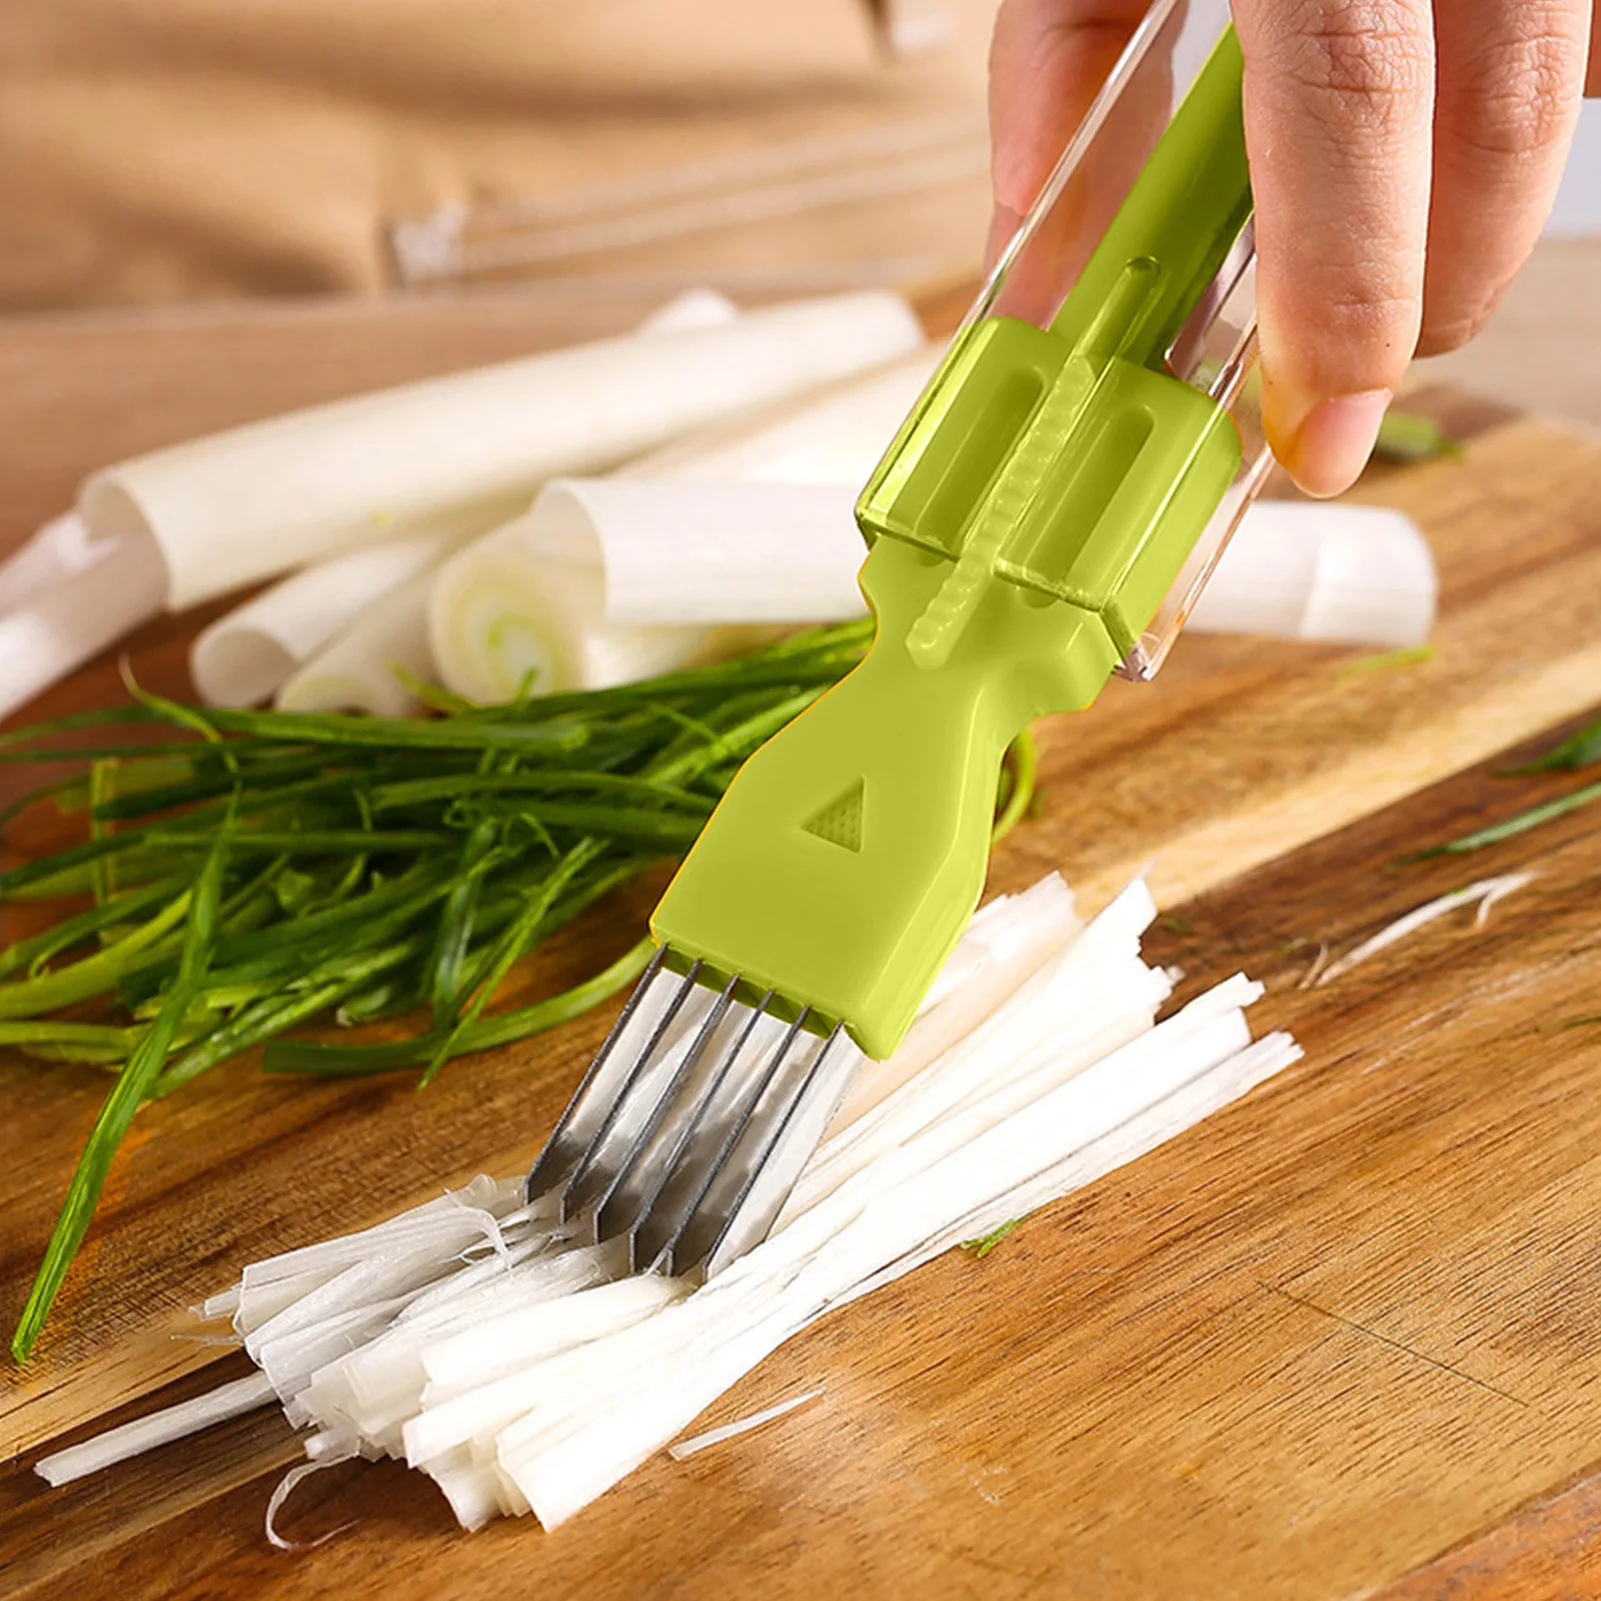 

Scallion Knife Onion Garlic Vegetable Cutter Kitchen Accessories Cut Garlic Tomato Device Shredders Slicers Cooking Tools 2022